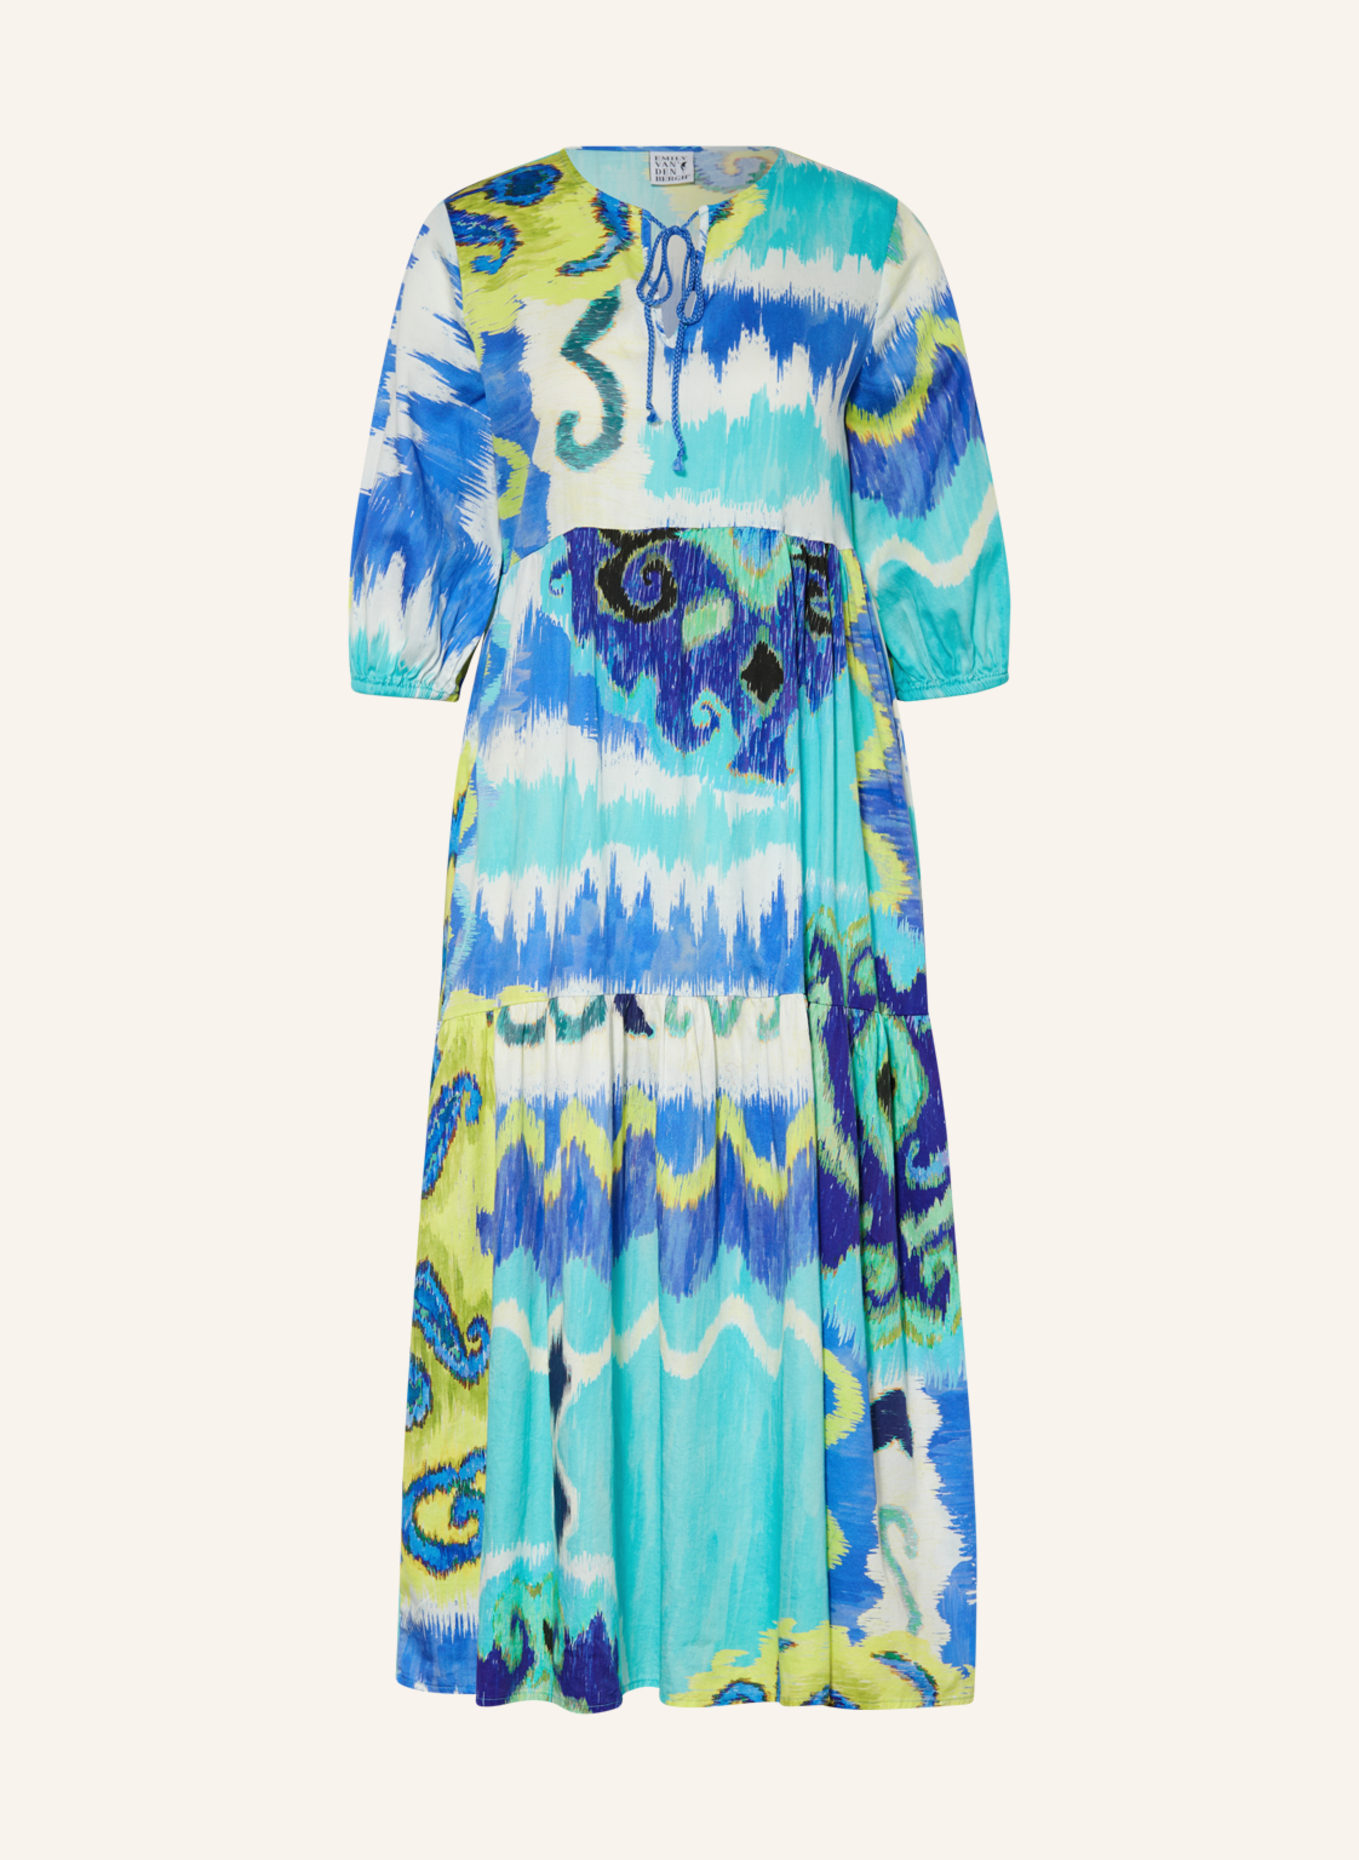 Emily VAN DEN BERGH Dress with 3/4 sleeves, Color: BLUE/ NEON YELLOW/ TURQUOISE (Image 1)